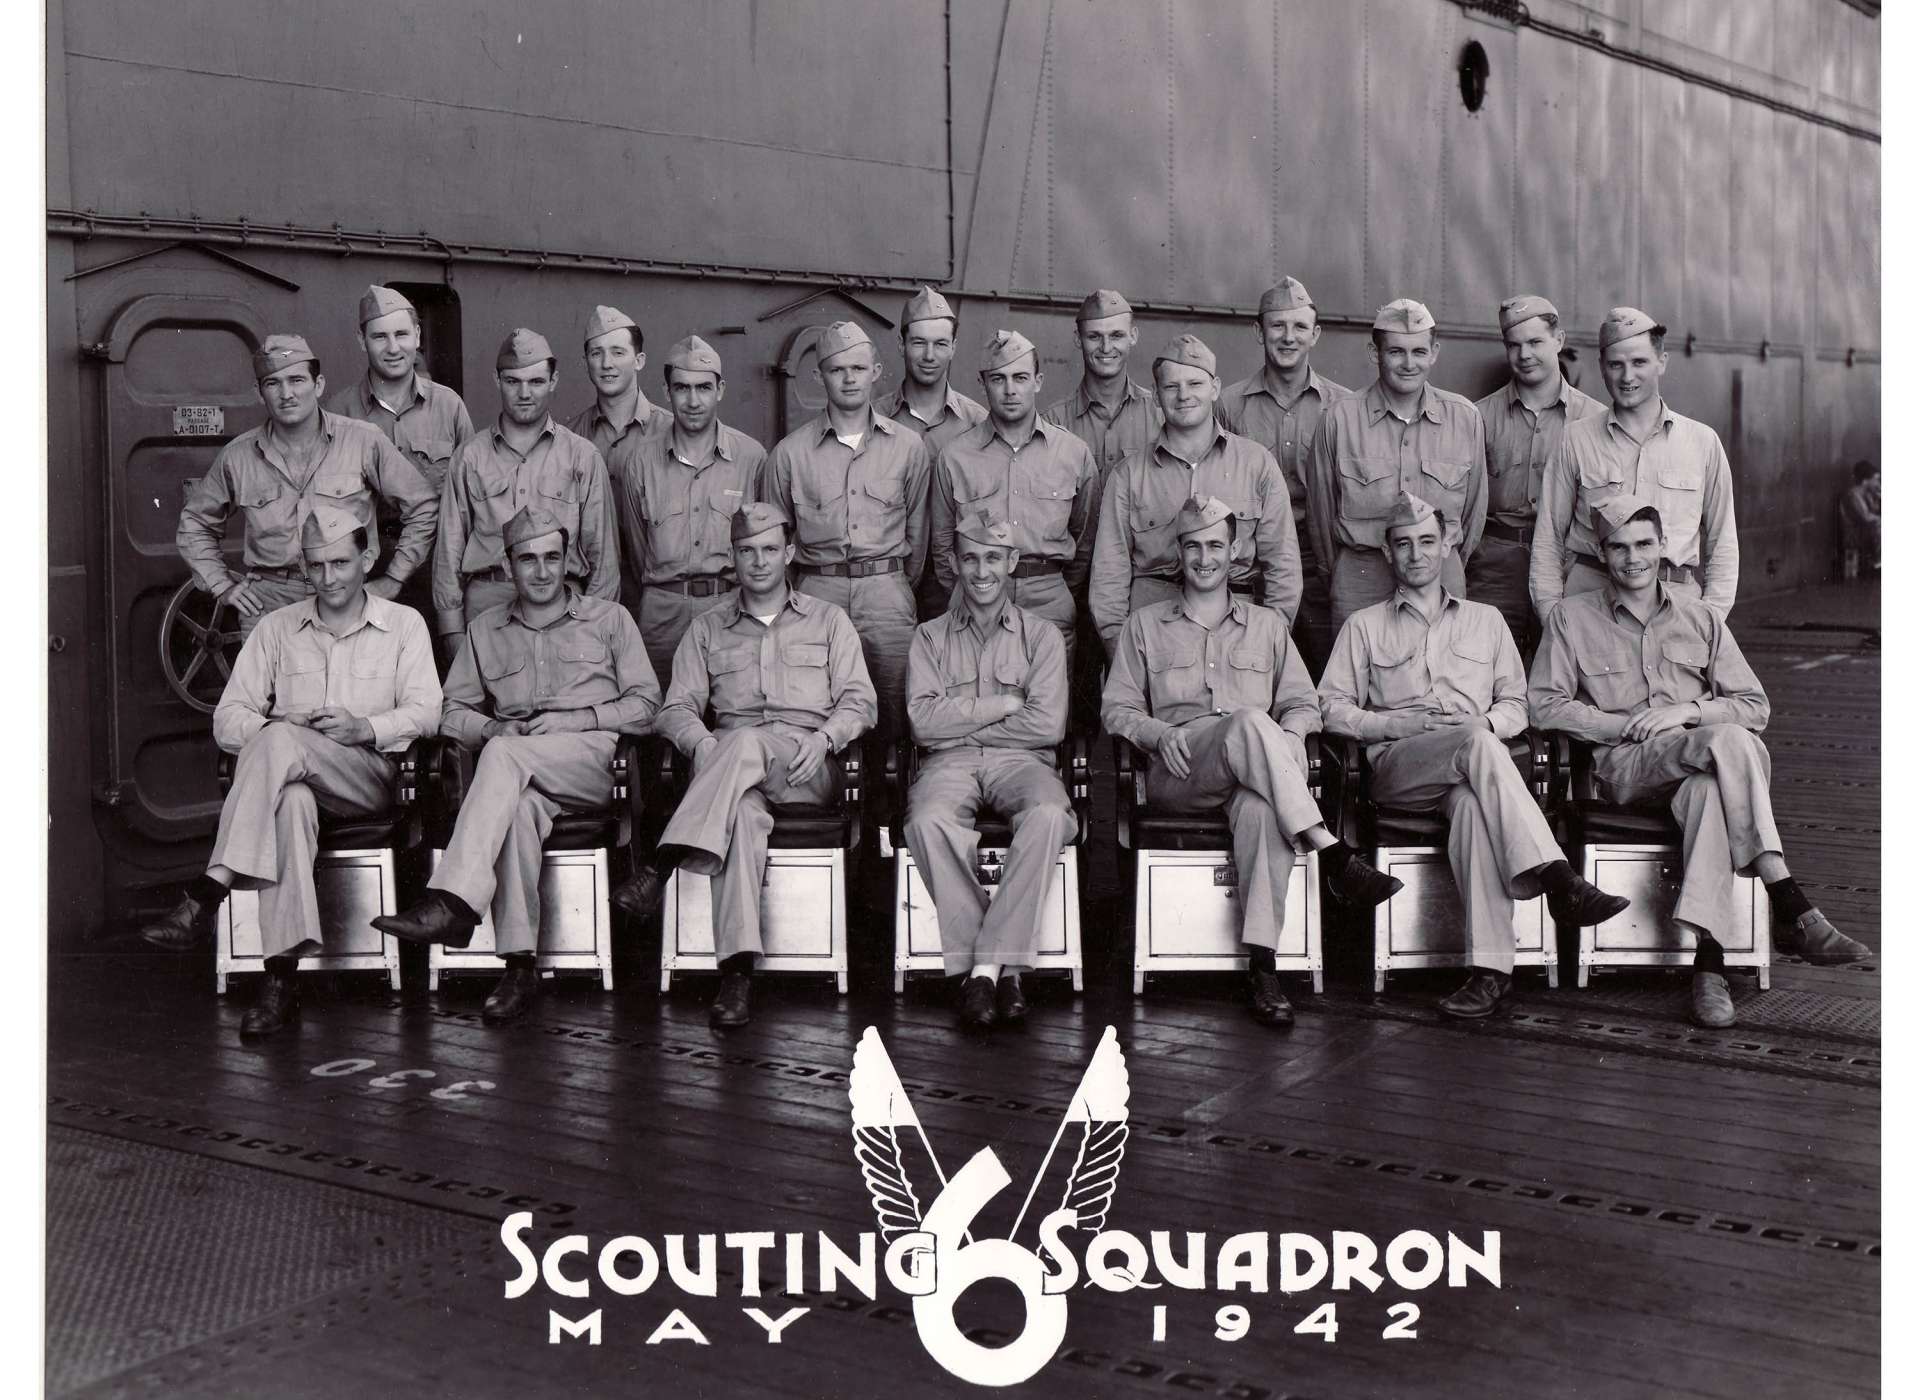 VS-6 pilots in 1942. Dusty Kleiss sitting second from right.